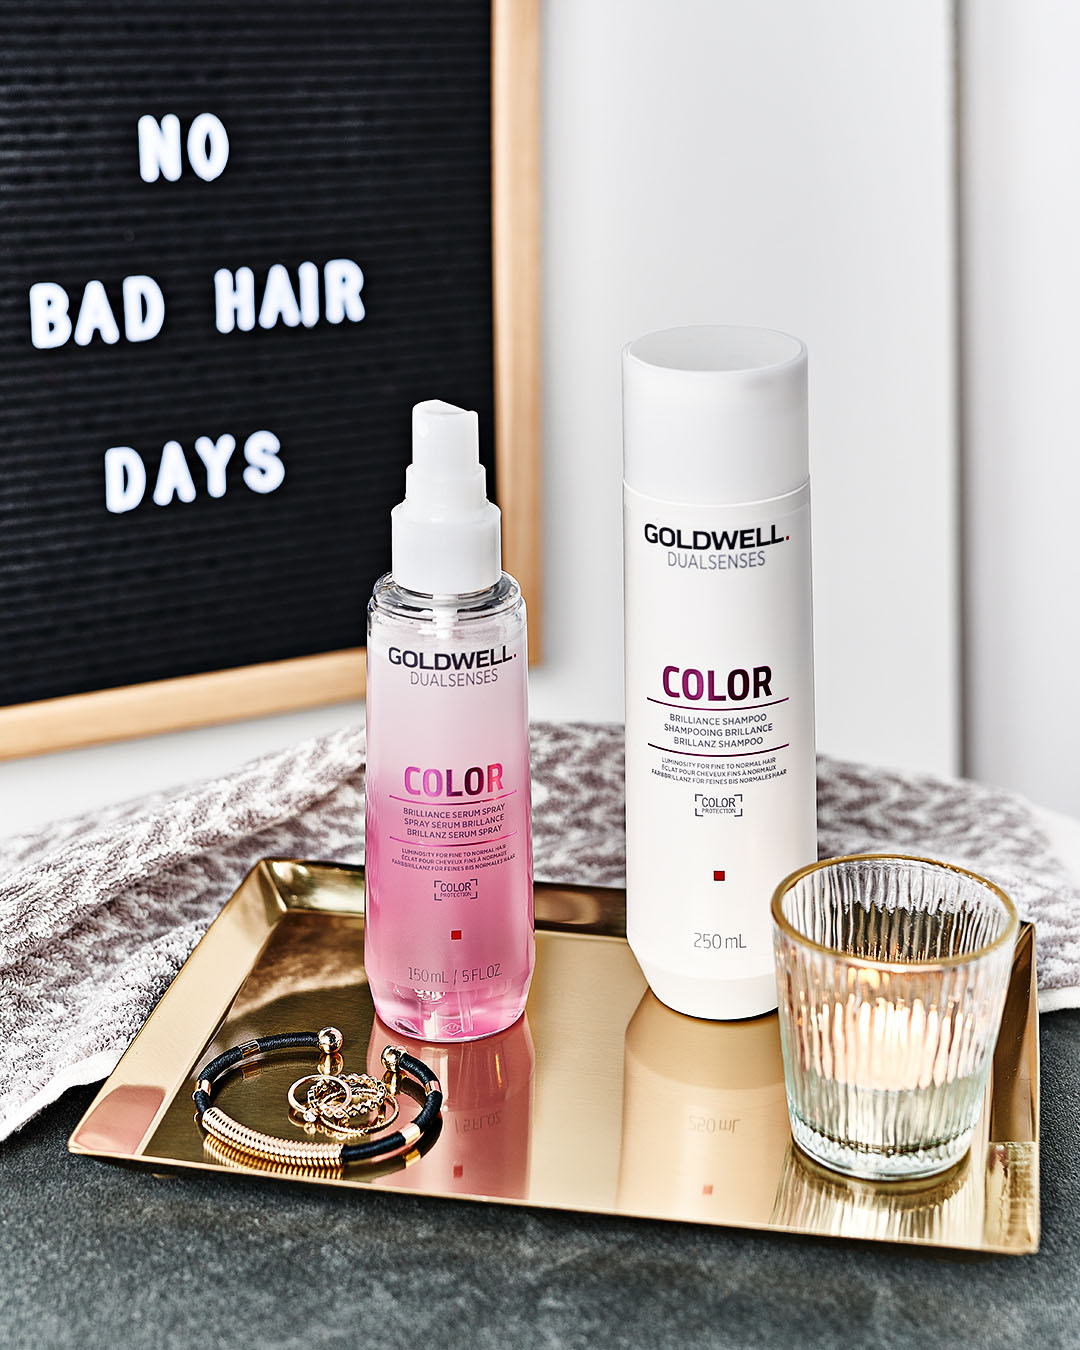 Five Tips From Dualsenses By Goldwell  To Maintain Hair Colour From Fading